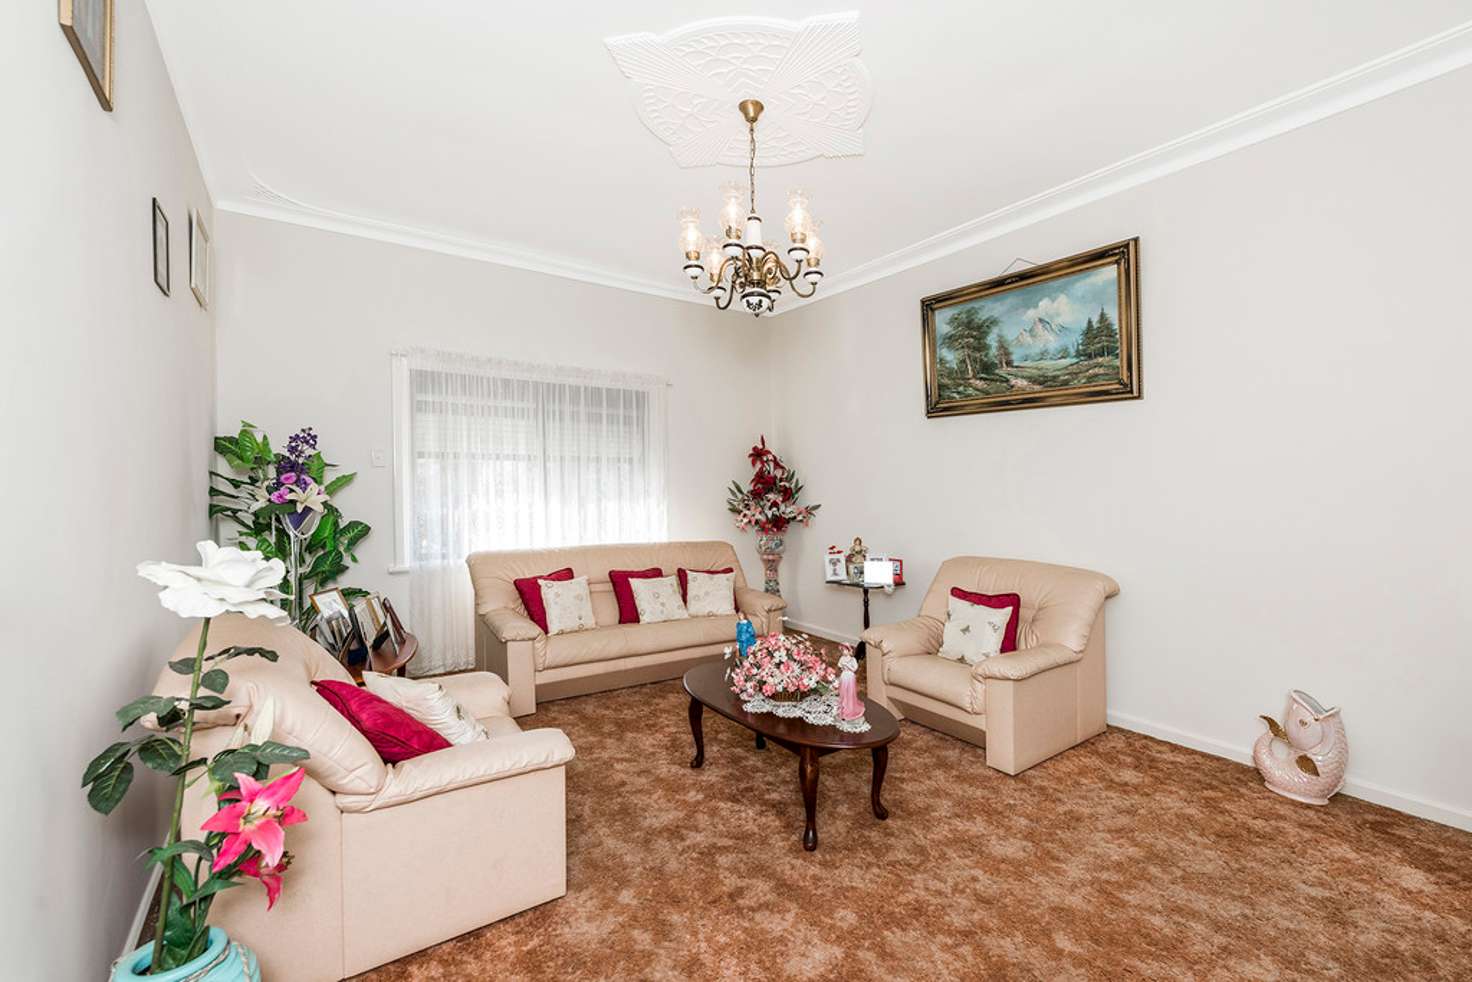 Main view of Homely house listing, 87 Glyde St, East Fremantle WA 6158